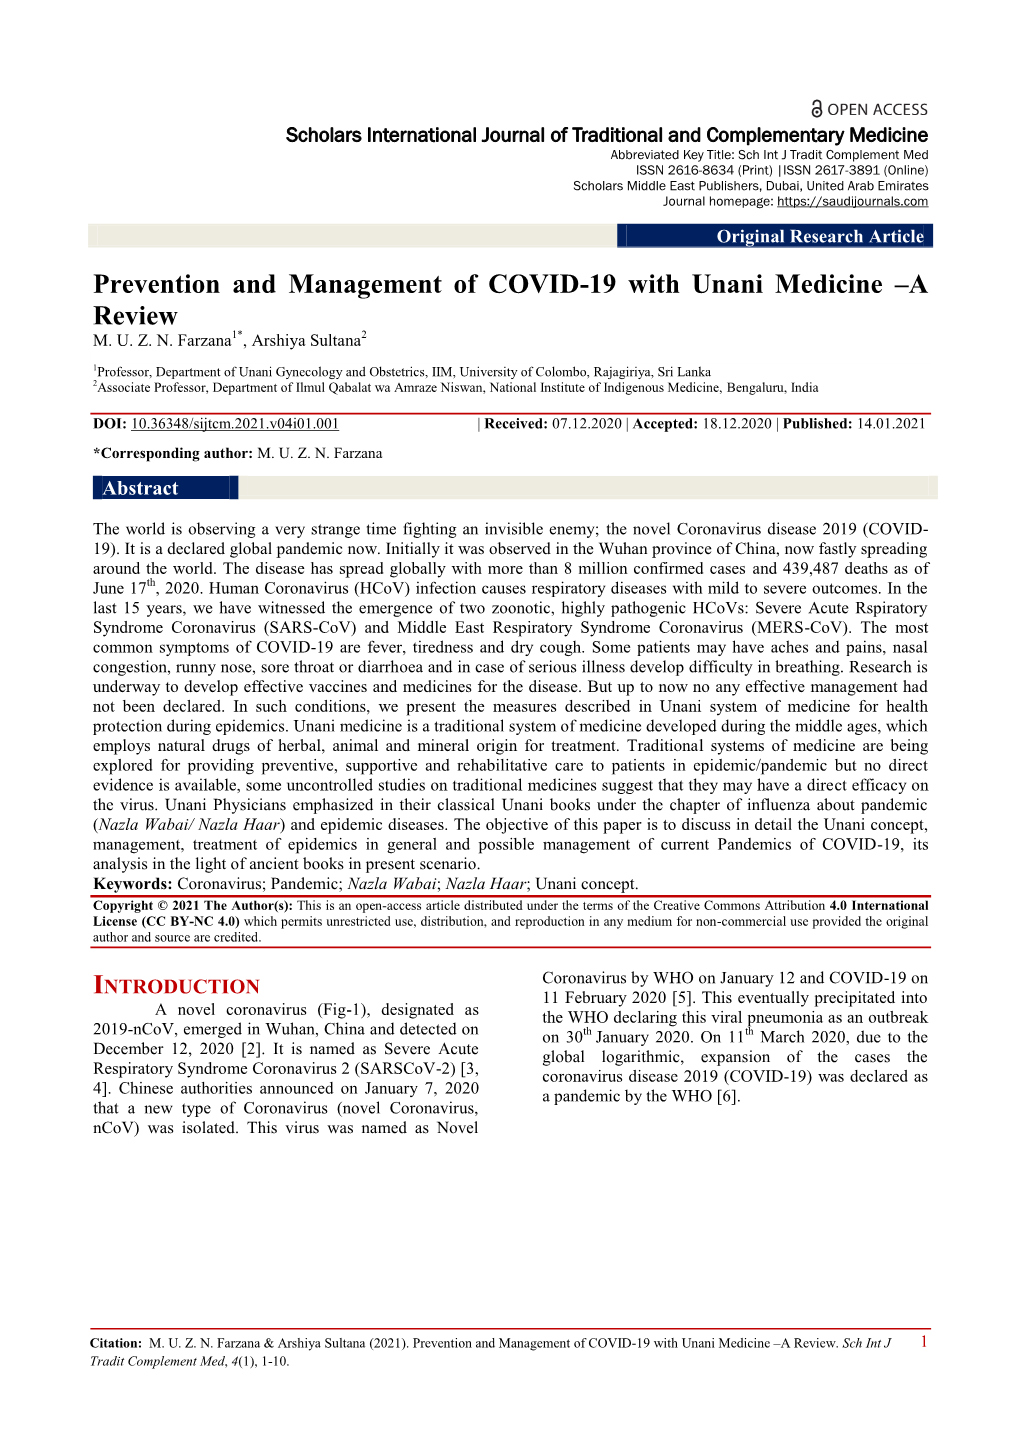 Prevention and Management of COVID-19 with Unani Medicine –A Review M